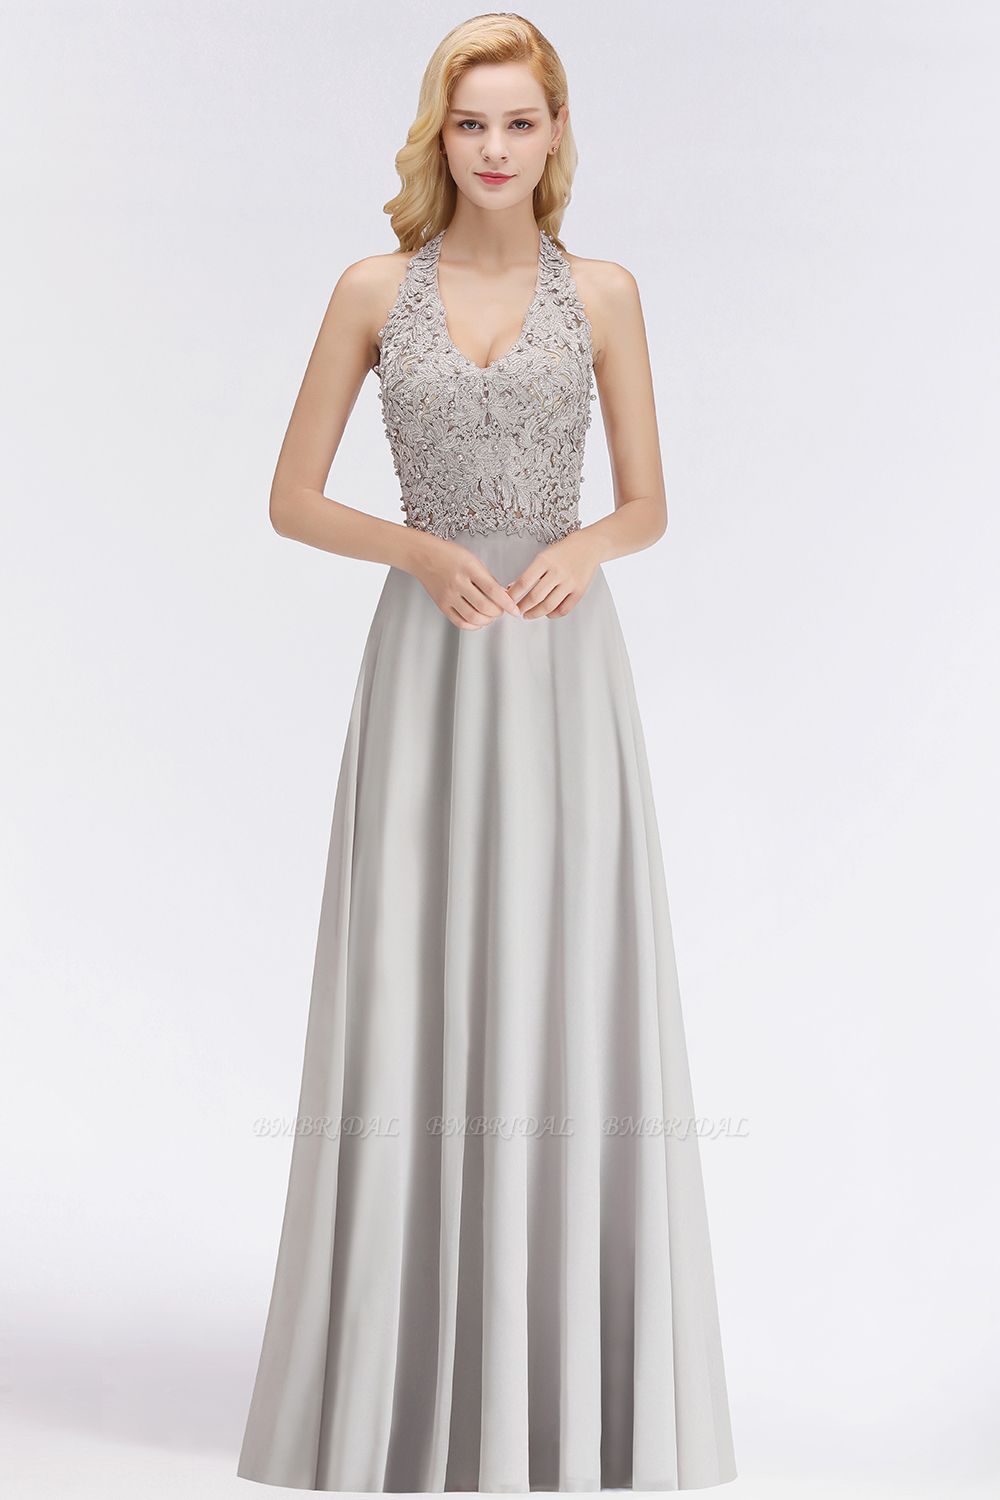 BMbridal A-line Halter Chiffon Lace Bridesmaid Dress with Beadings